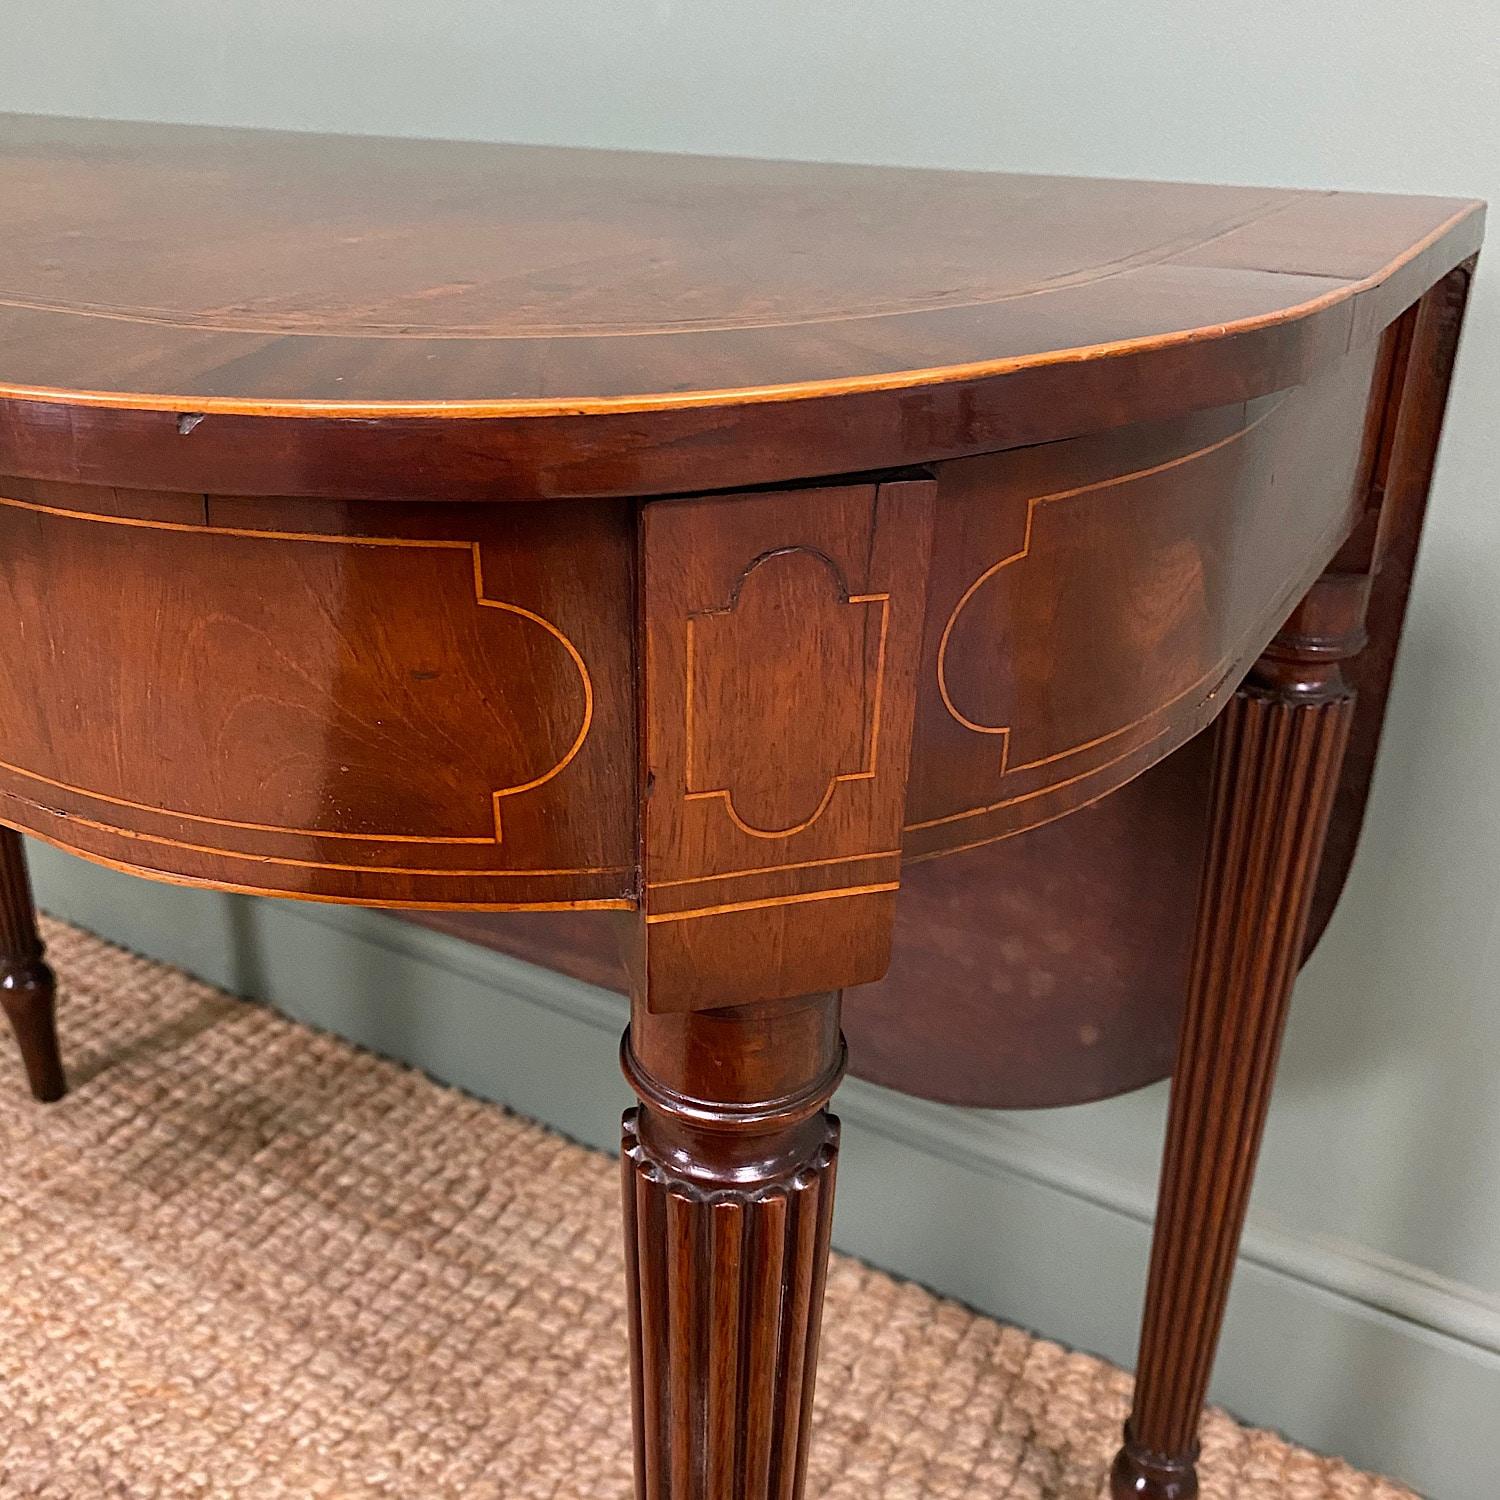 Mahogany Country House 19th century Georgian Antique Side Table / Tea Table For Sale